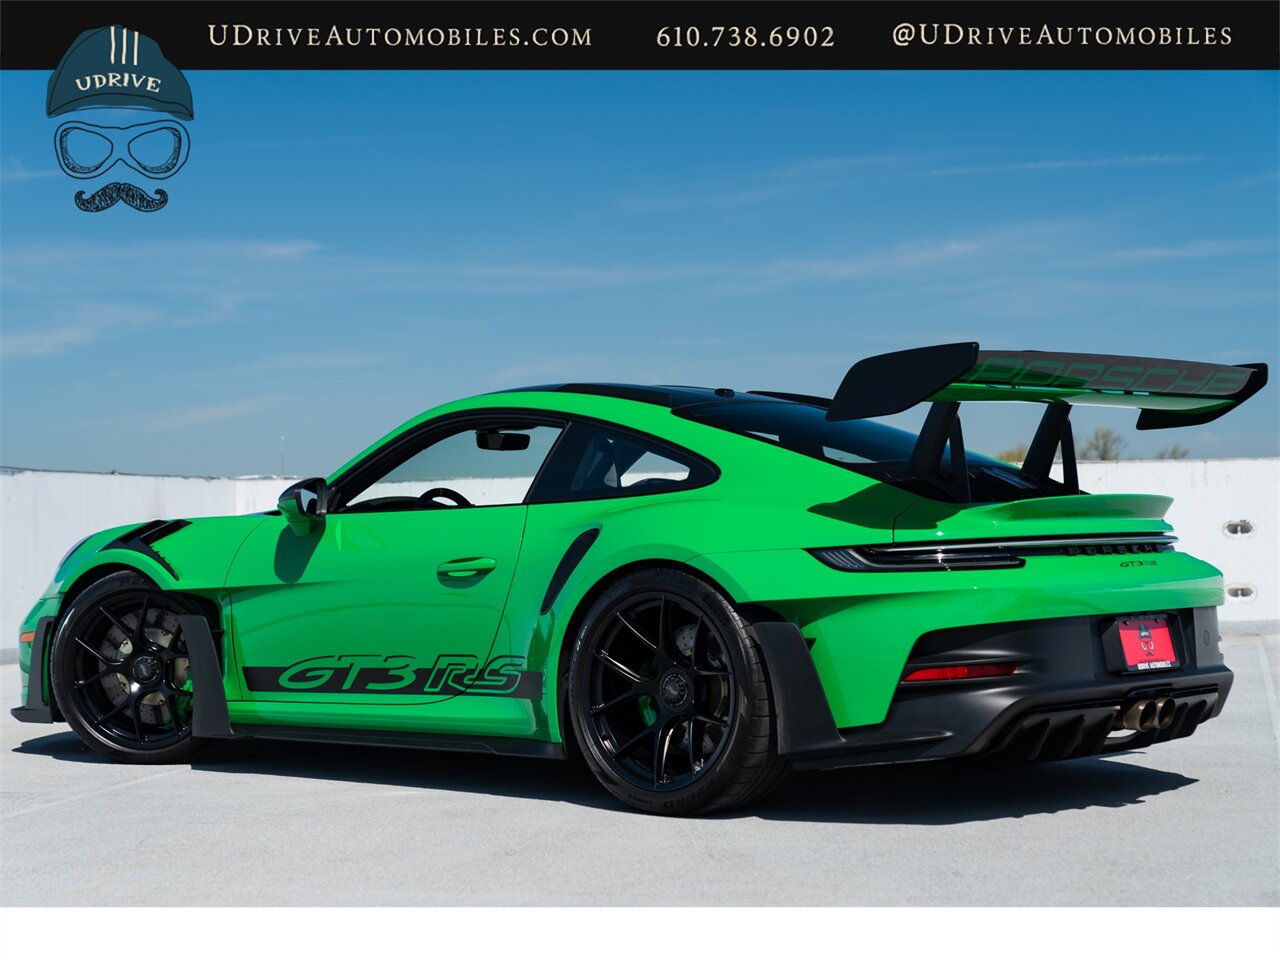 2023 Porsche 911 GT3 RS  Weissach Pkg FAL Full Body PPF $43k in Extras - Photo 4 - West Chester, PA 19382